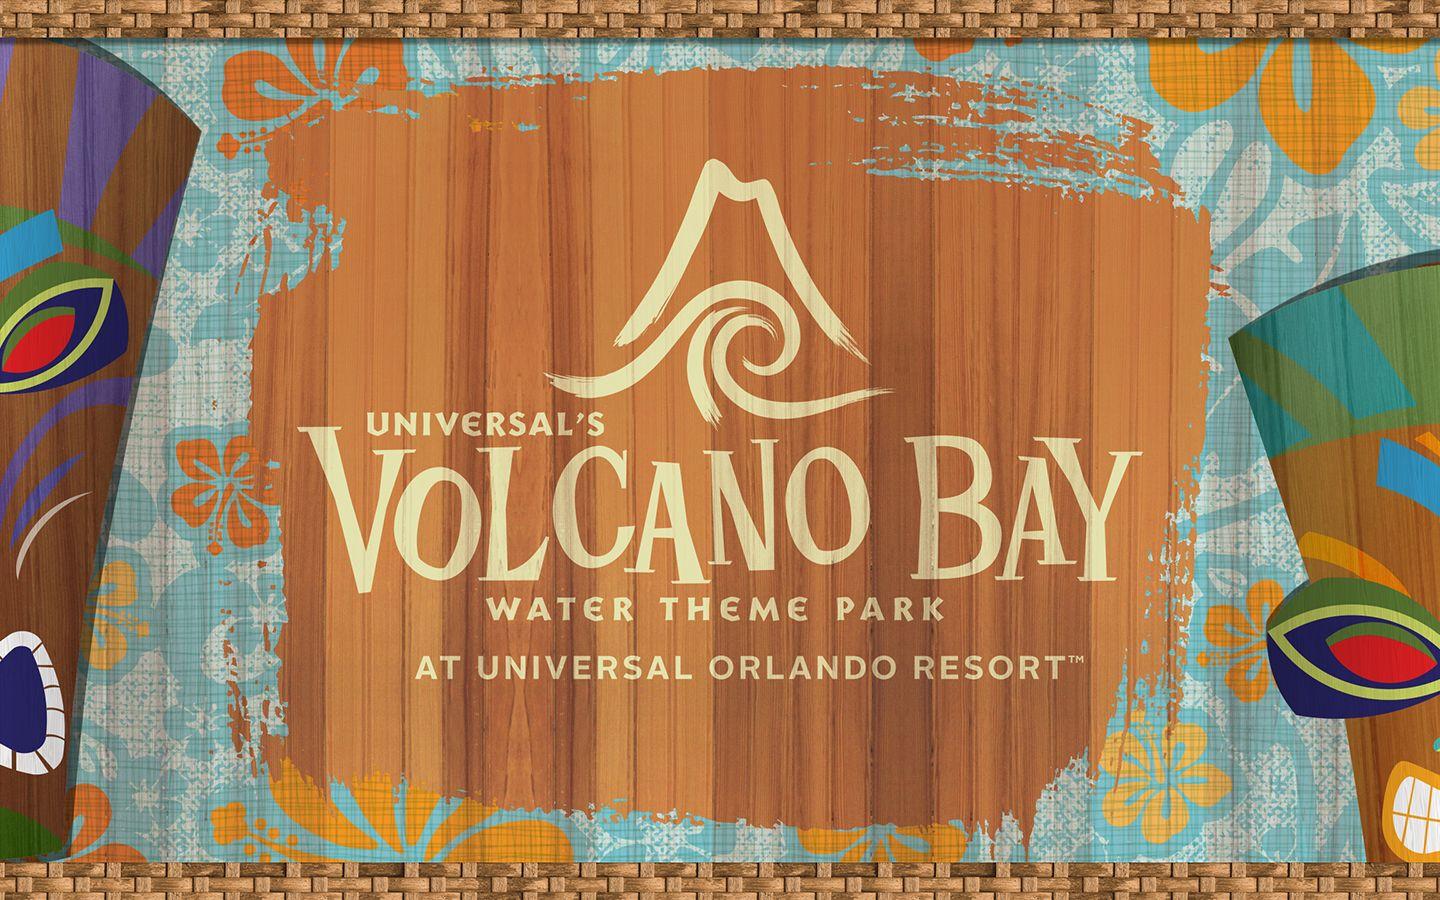 Universal Orlando Close Up. Get Ready for Universal's Volcano Bay